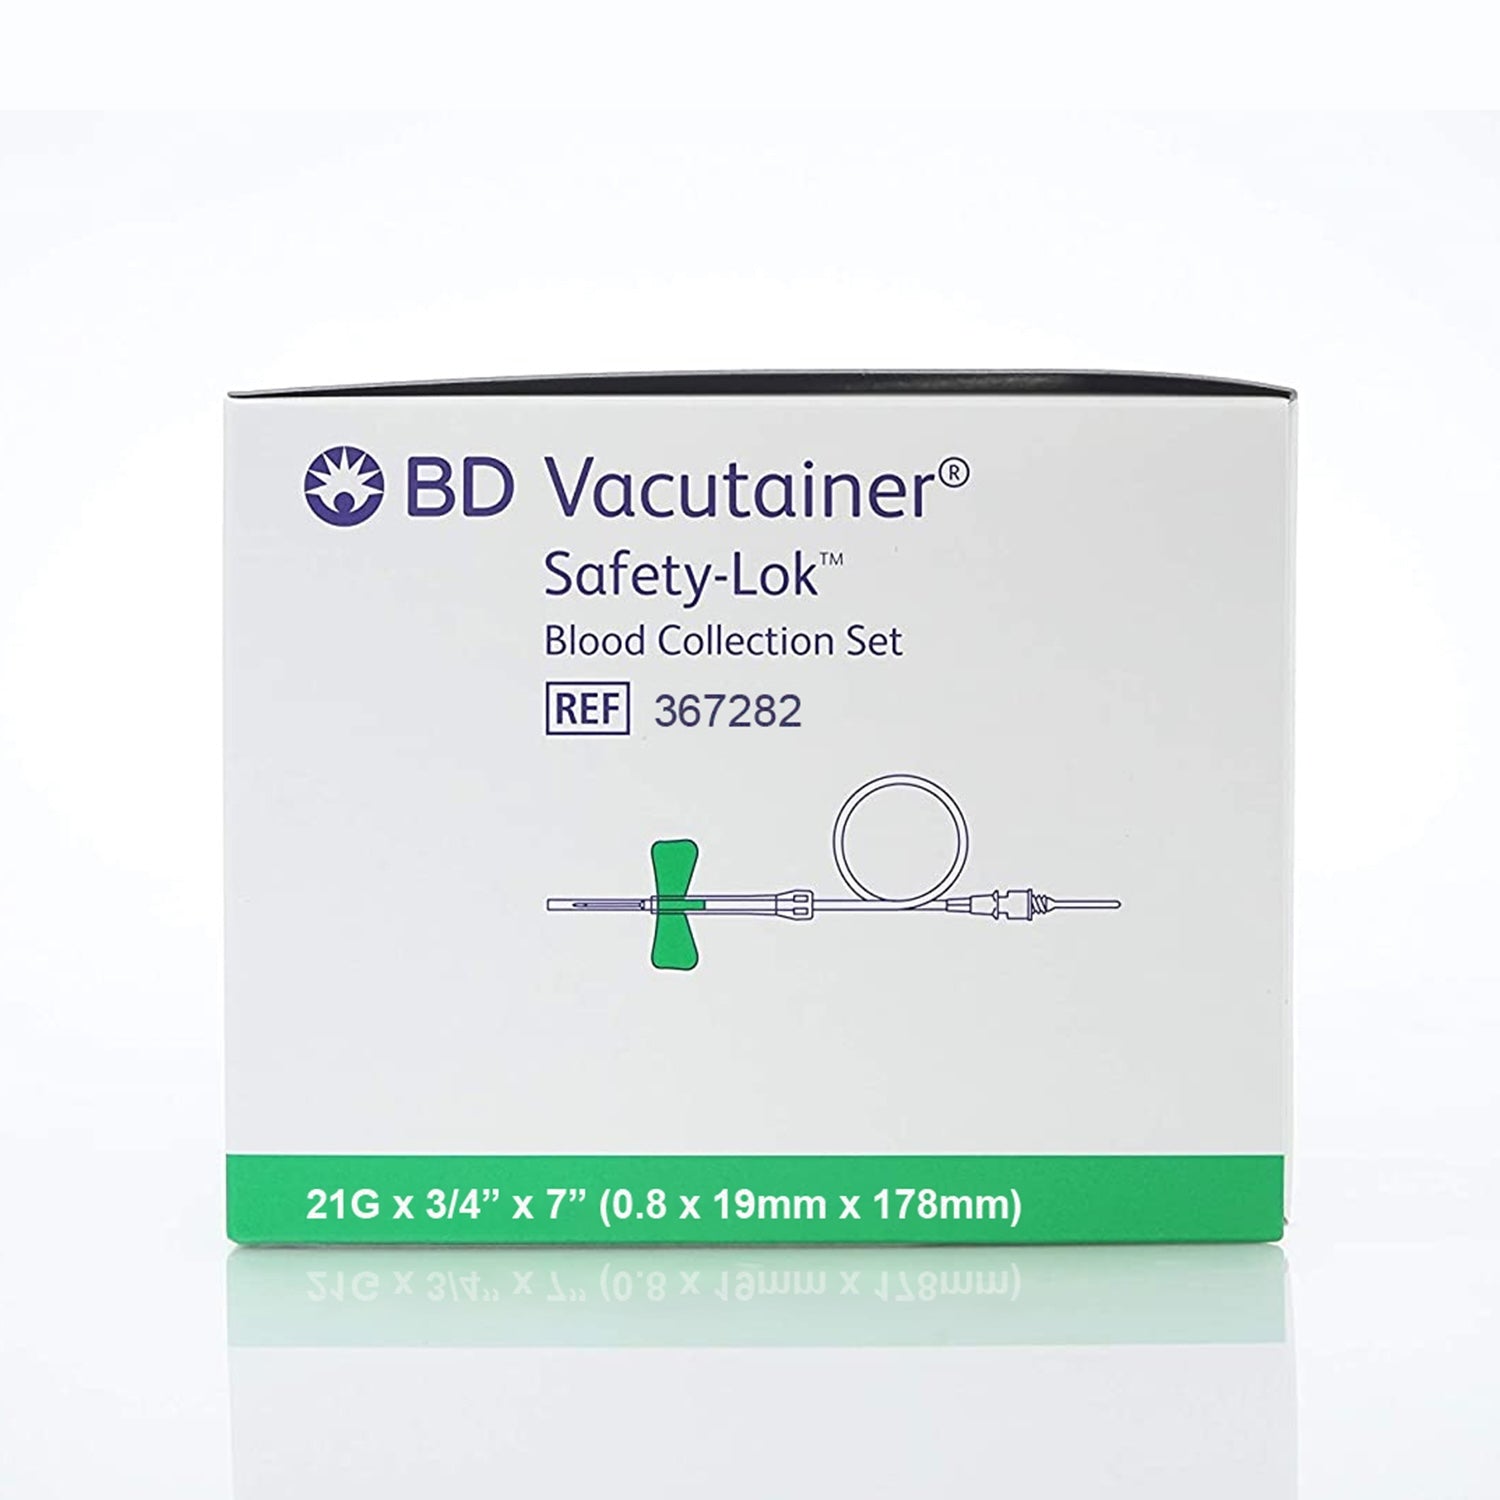 BD Vacutainer Safety Lok Blood Collection System with Pre-attached Holder | 0.75" Needle | 21G x 7" Tubing | Pack of 25 (6)